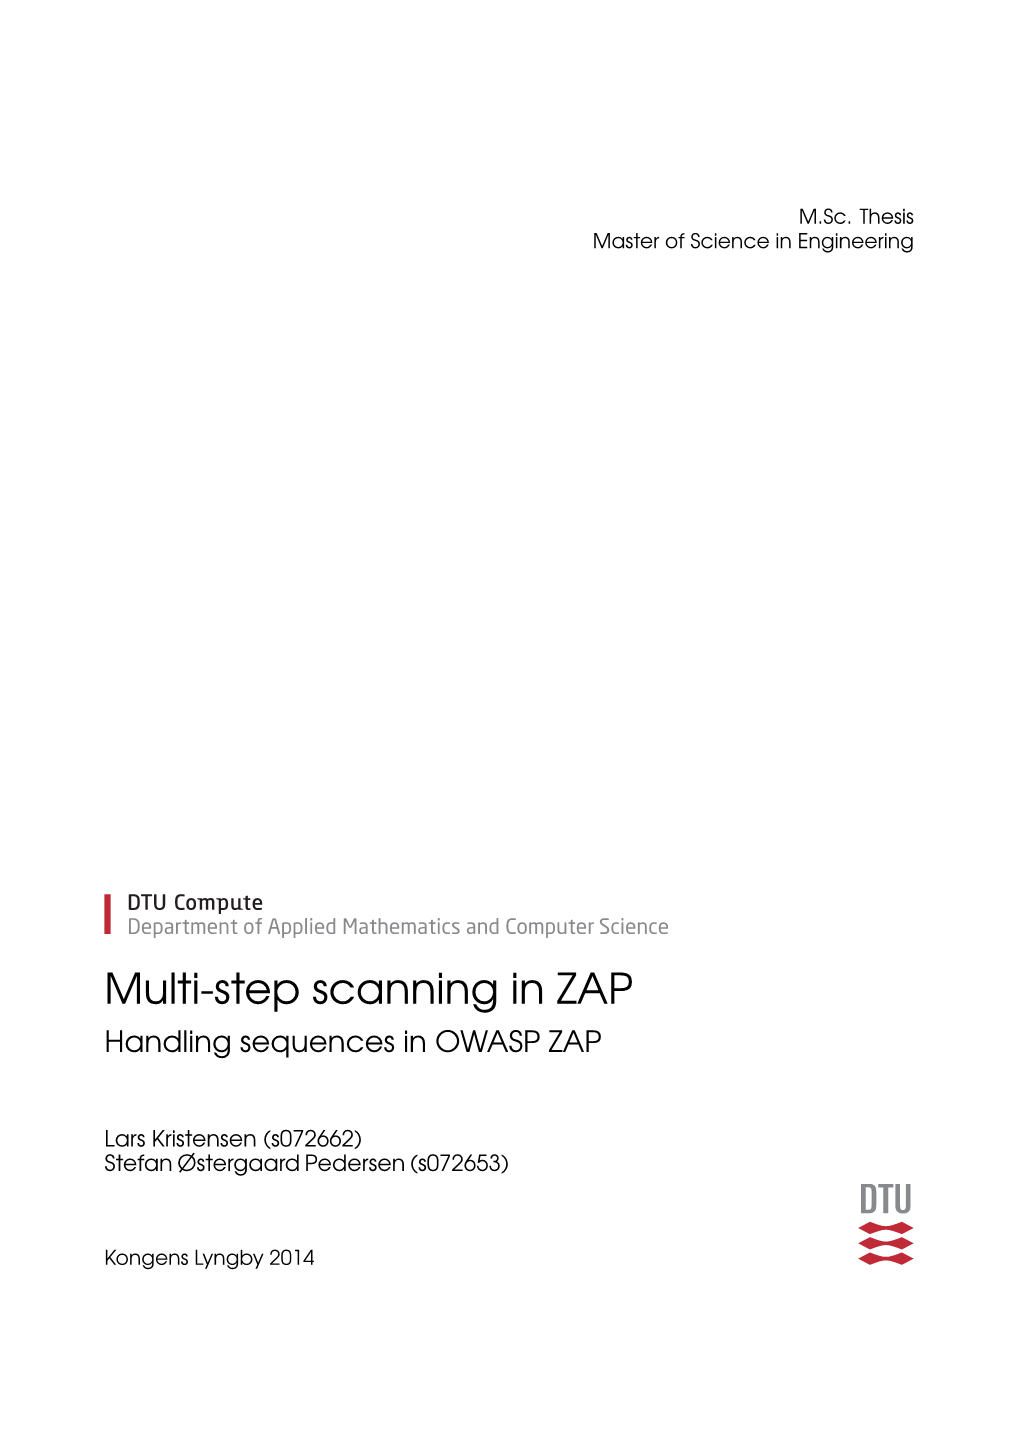 Multi-Step Scanning in ZAP Handling Sequences in OWASP ZAP